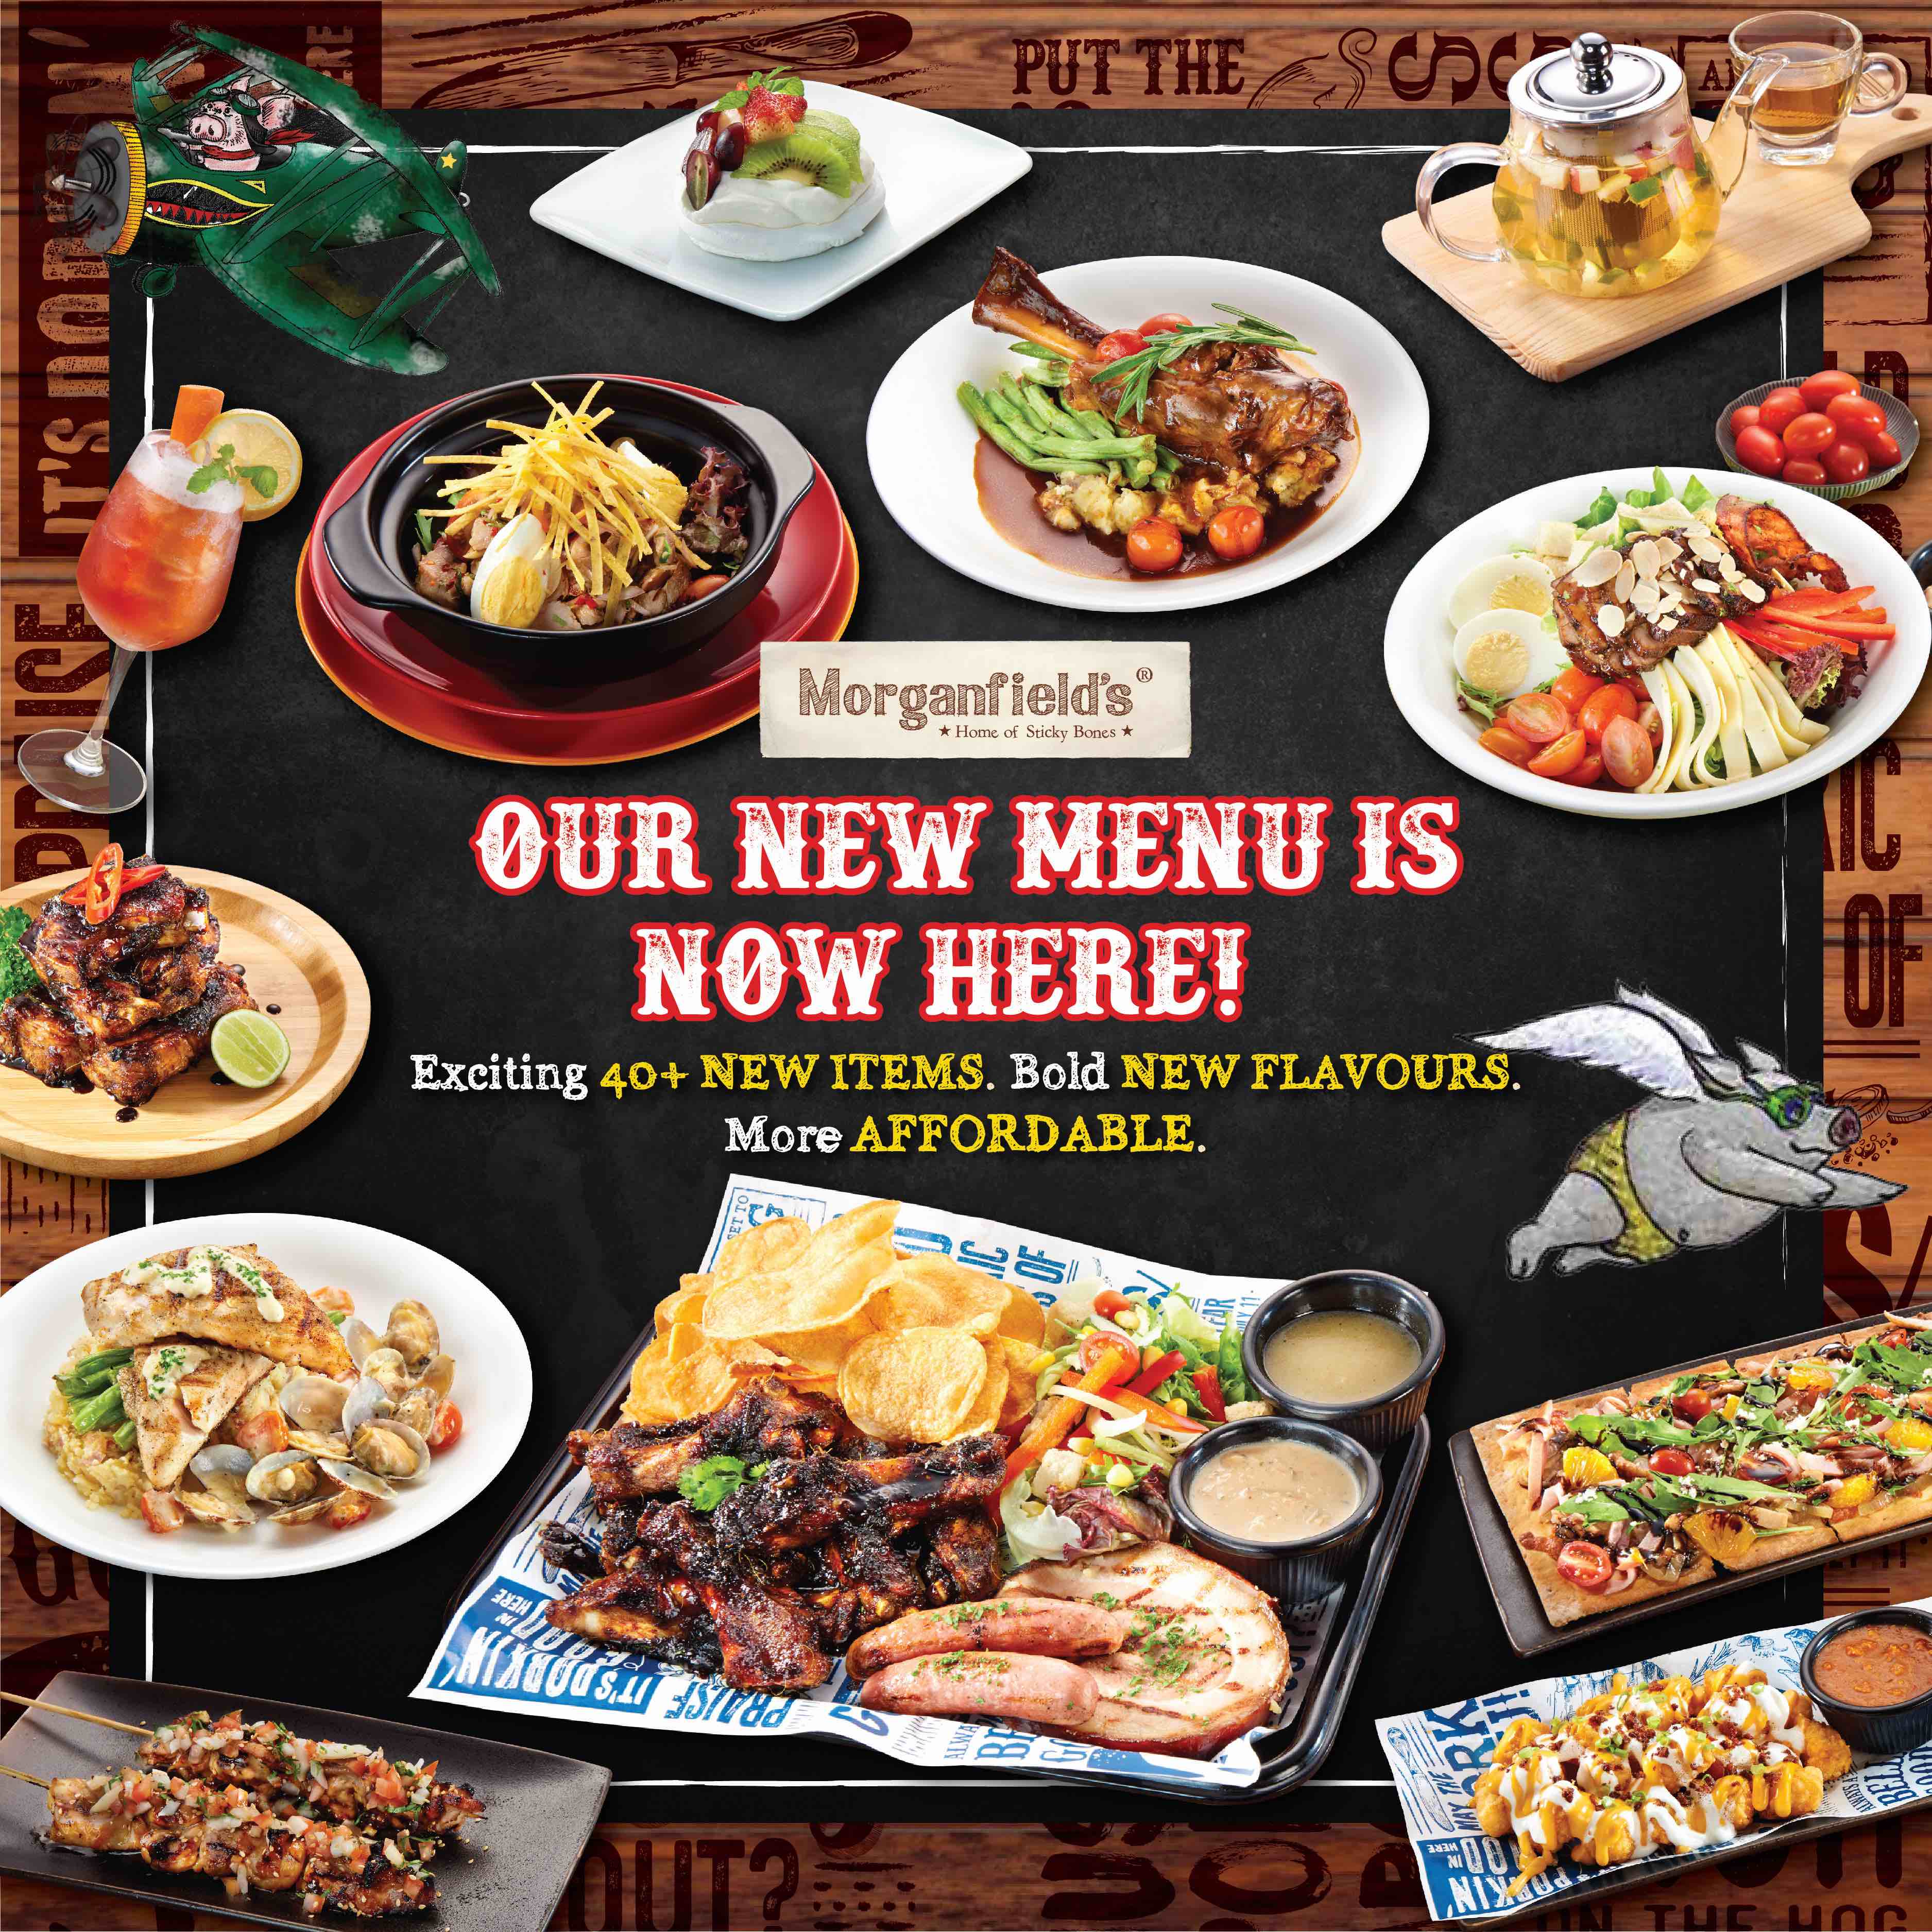 Morganfield's New Menu is Here!